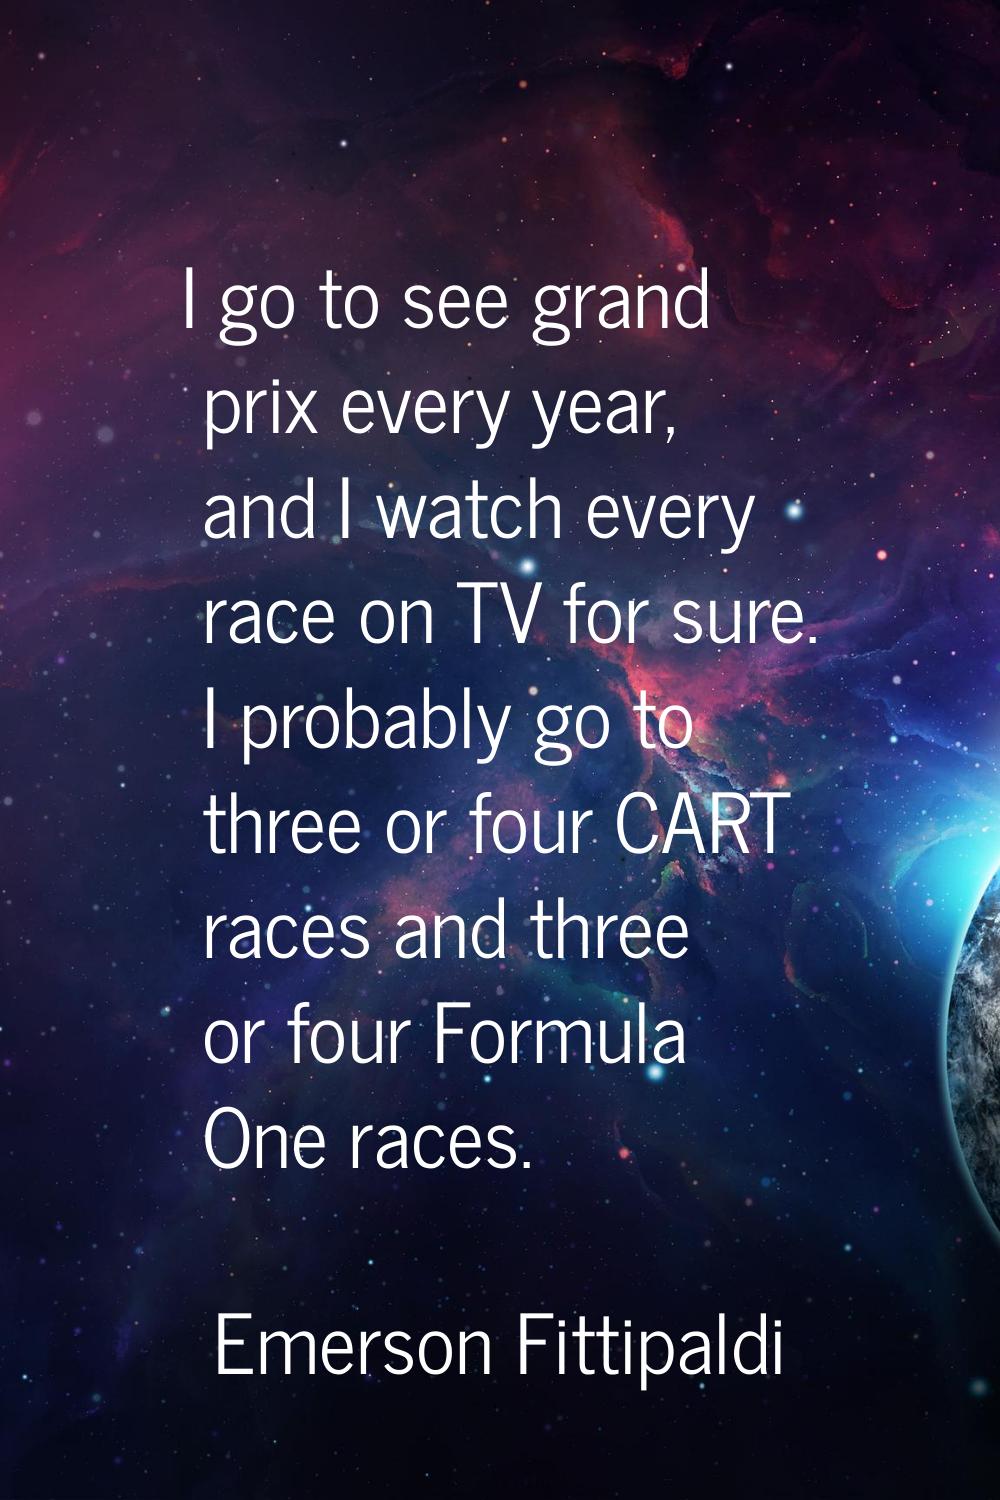 I go to see grand prix every year, and I watch every race on TV for sure. I probably go to three or